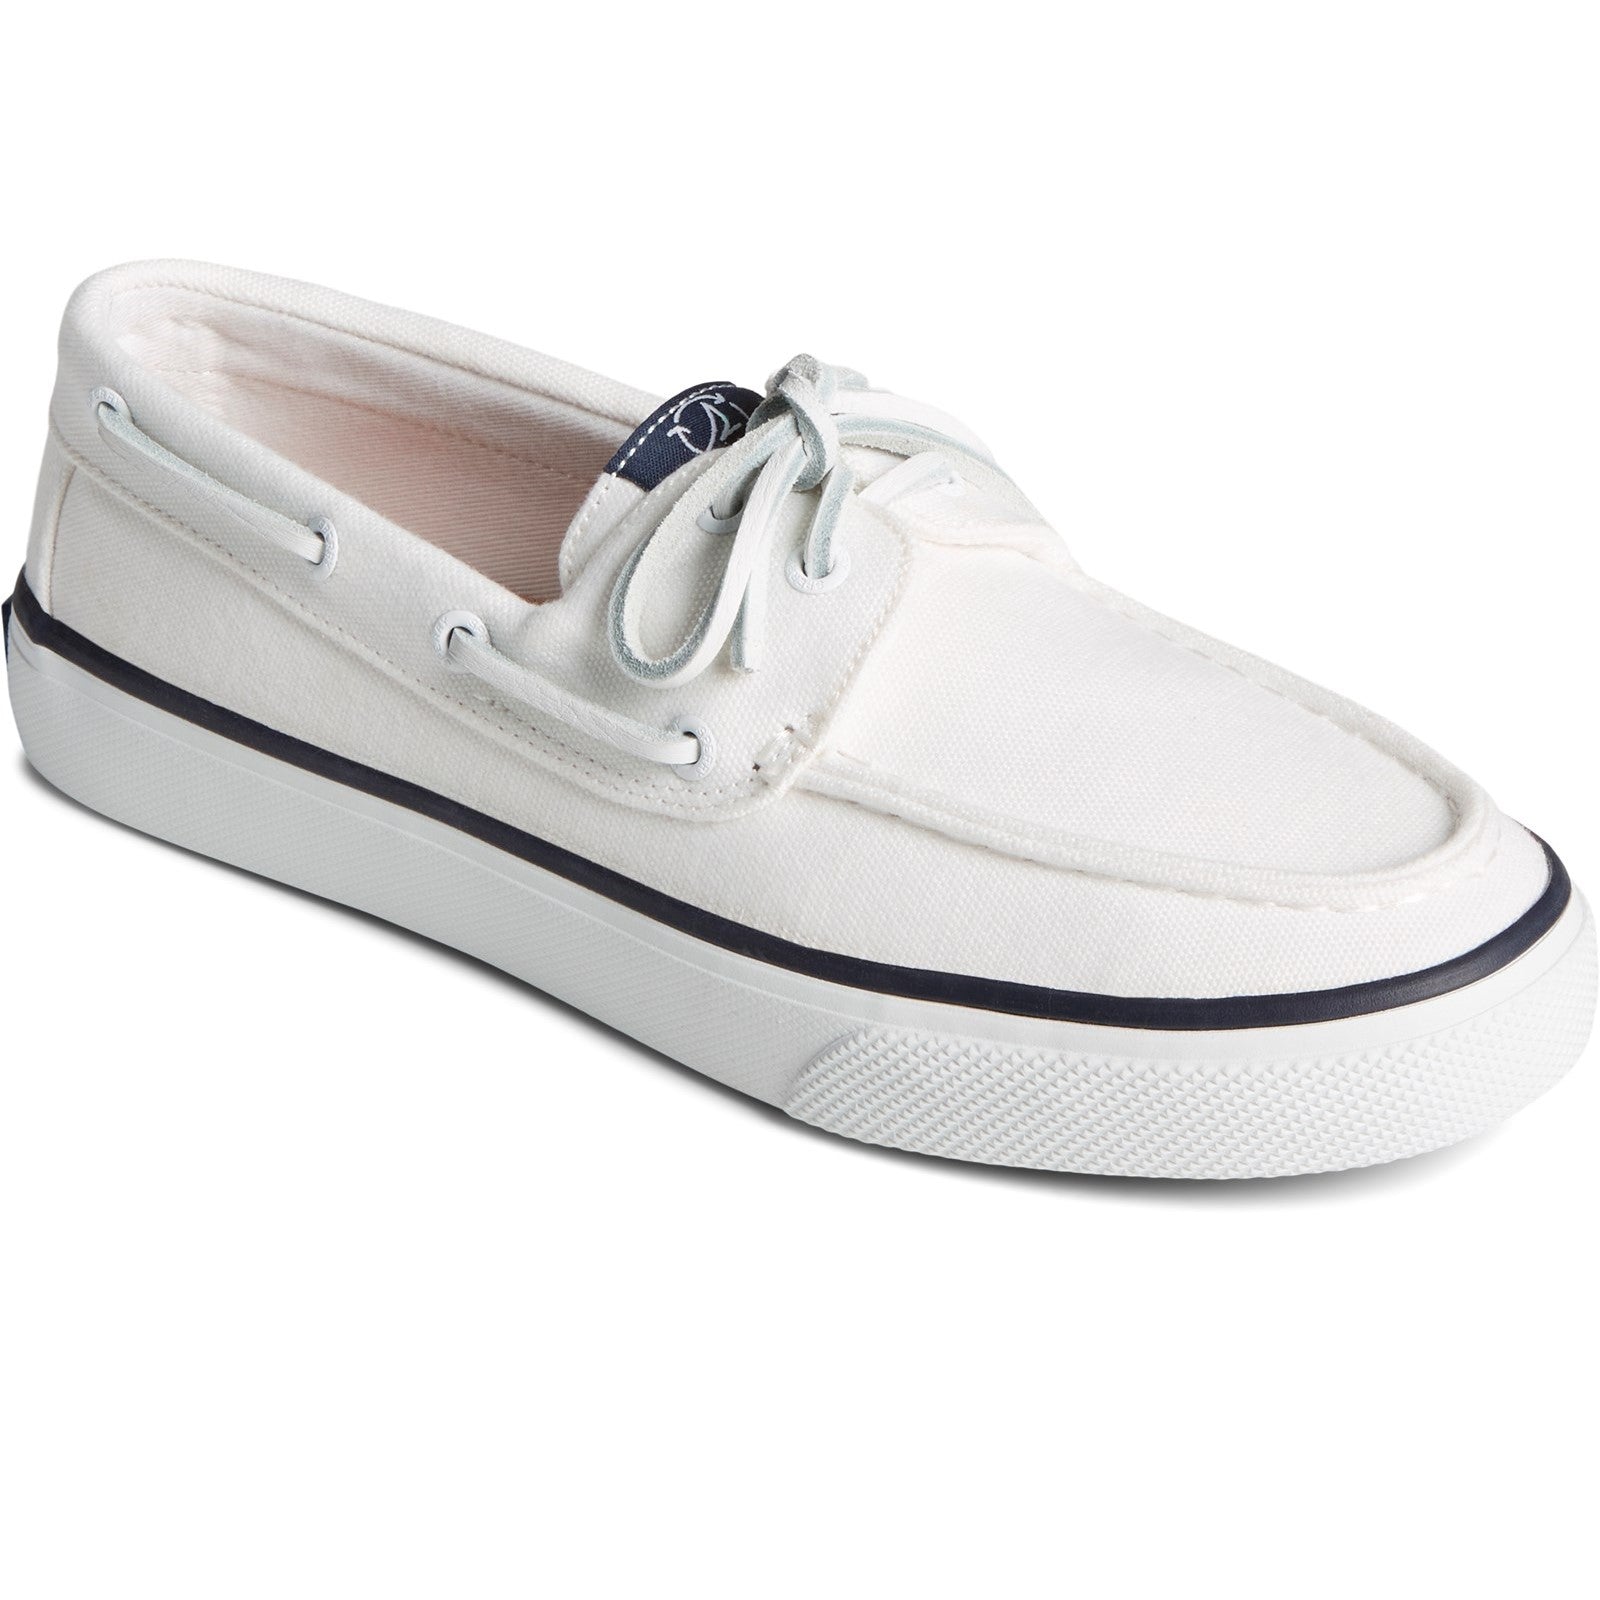 Sperry Womens Bahama 2.0 Core Boat Shoes - White